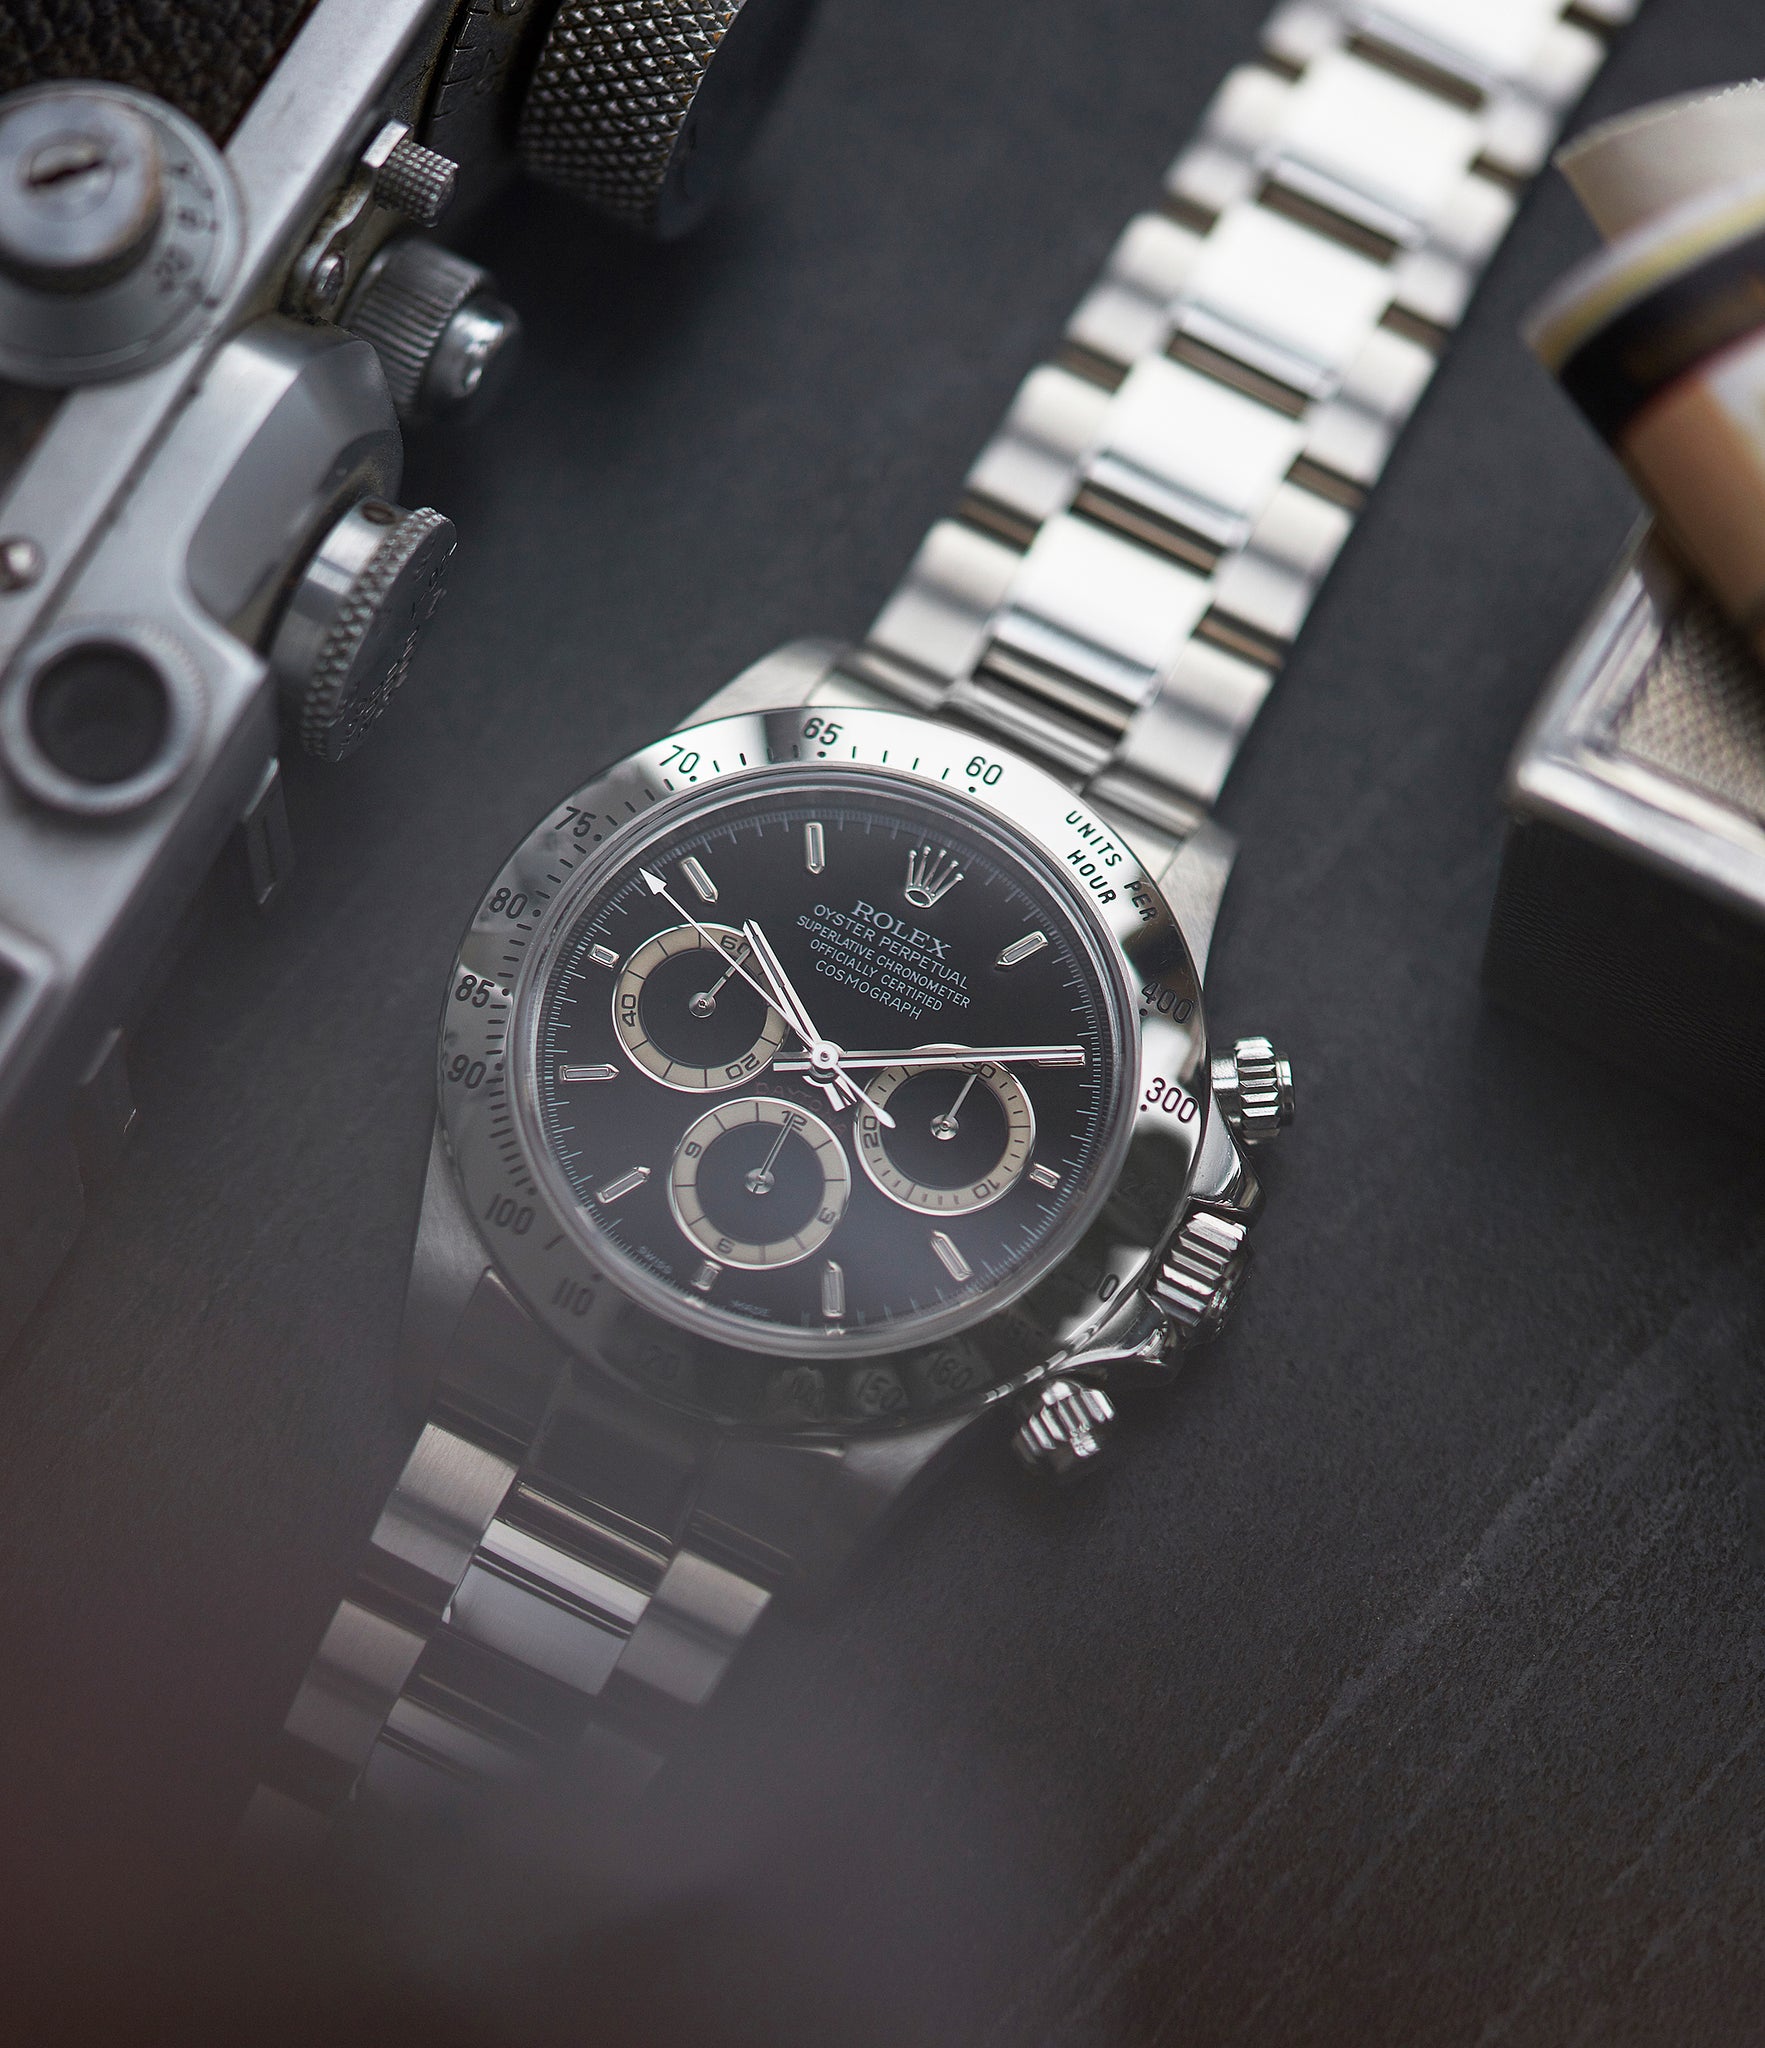 shop vintage Rolex Zenith Daytona 16520 P series steel chronograph watch black dial for sale online at A Collected Man London UK specialist of rare watches